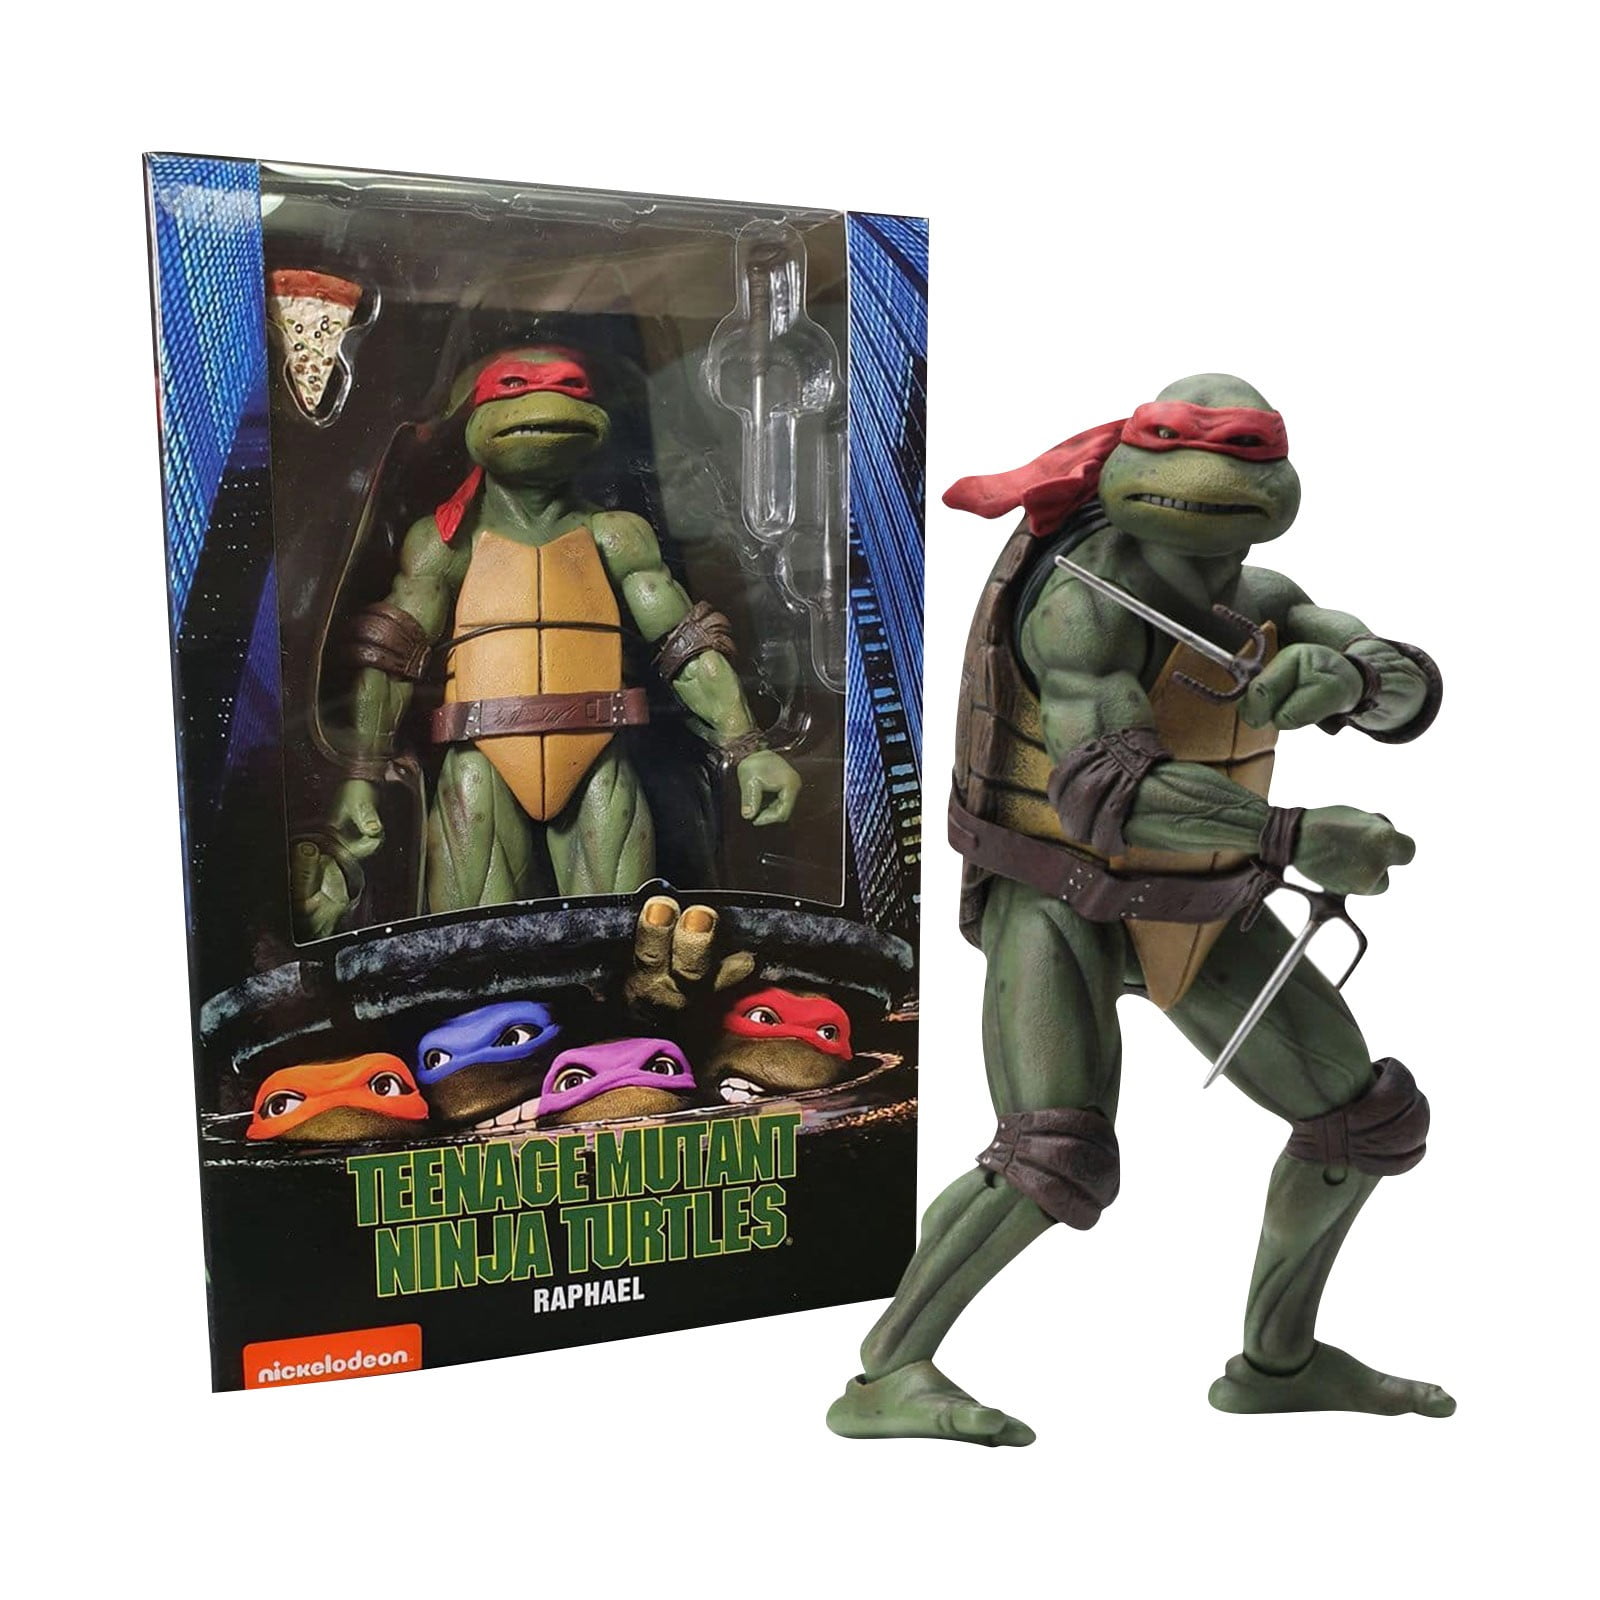 J&G Teenage Mutant Ninja Turtles Action Figures Toys with Red Headband 4 Pcs - TMNT Mini Action Figures Kids - Toy for Kids Gift Decorations